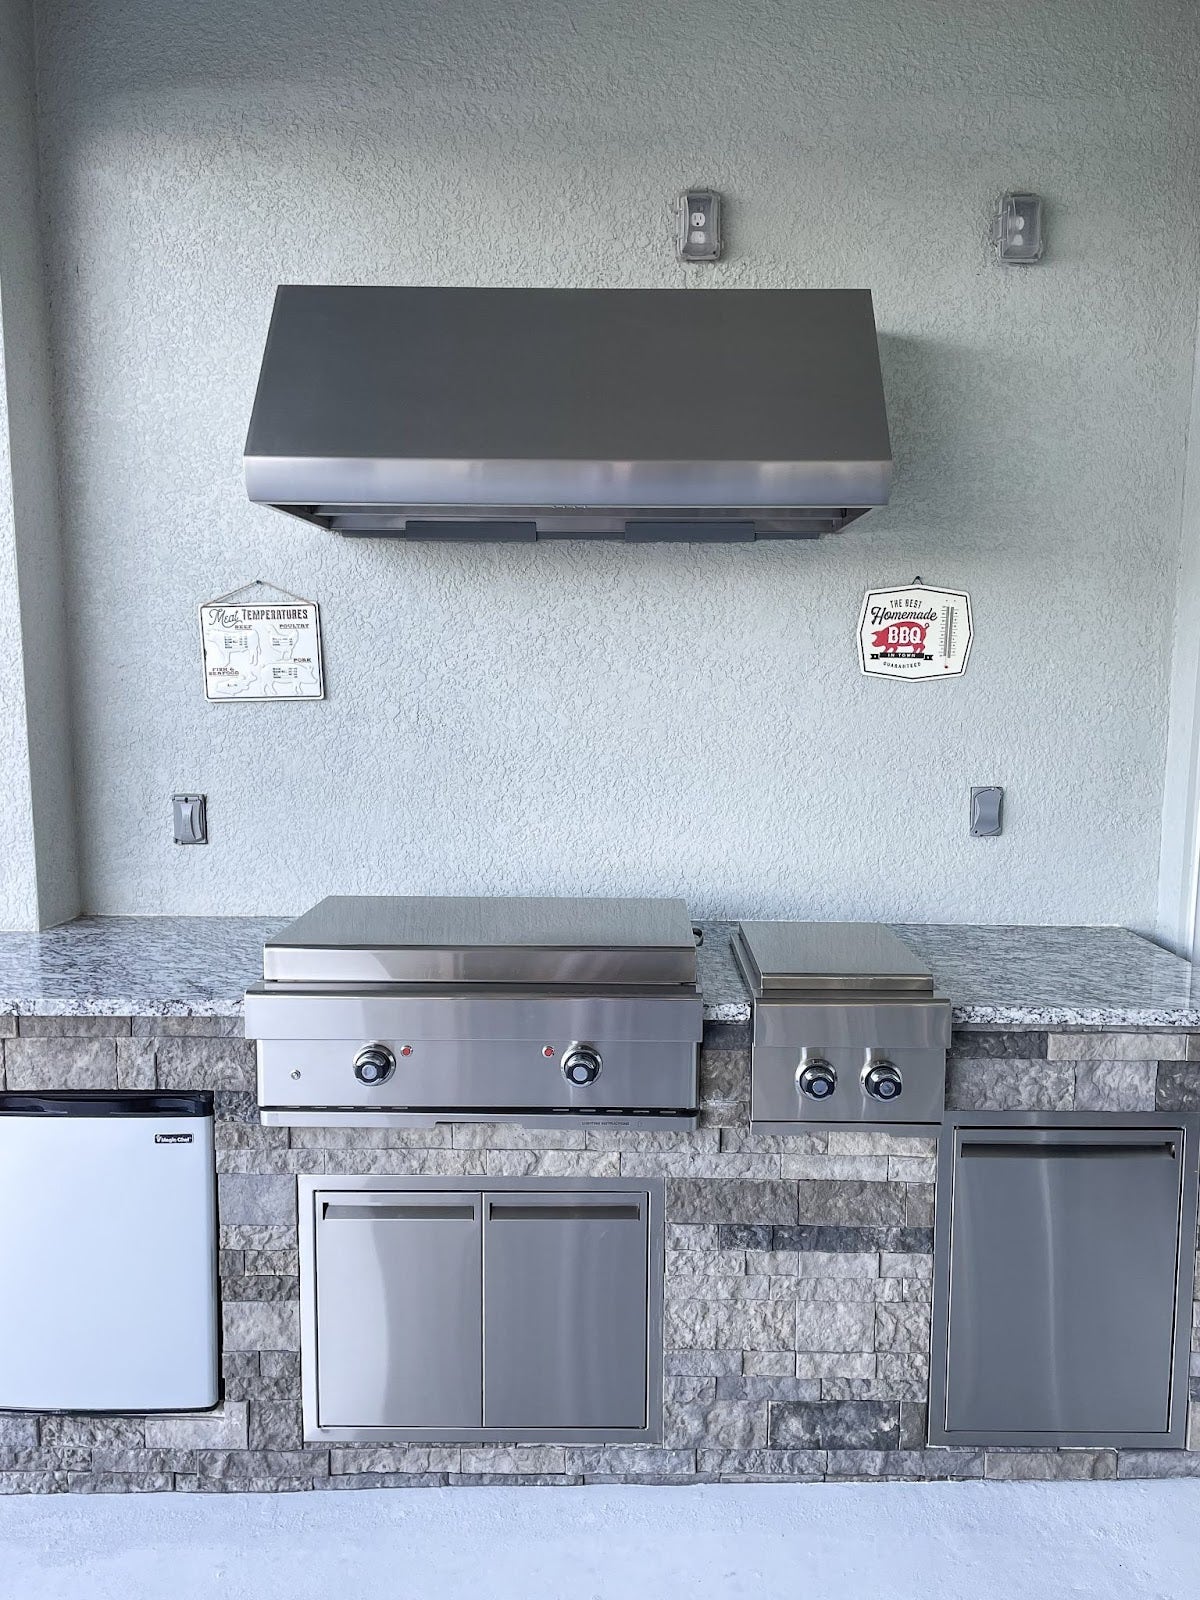 Sleek outdoor kitchen featuring a Proline range hood, granite countertops, and built-in stainless steel appliances for a modern cooking experience - prolinerangehoods.com